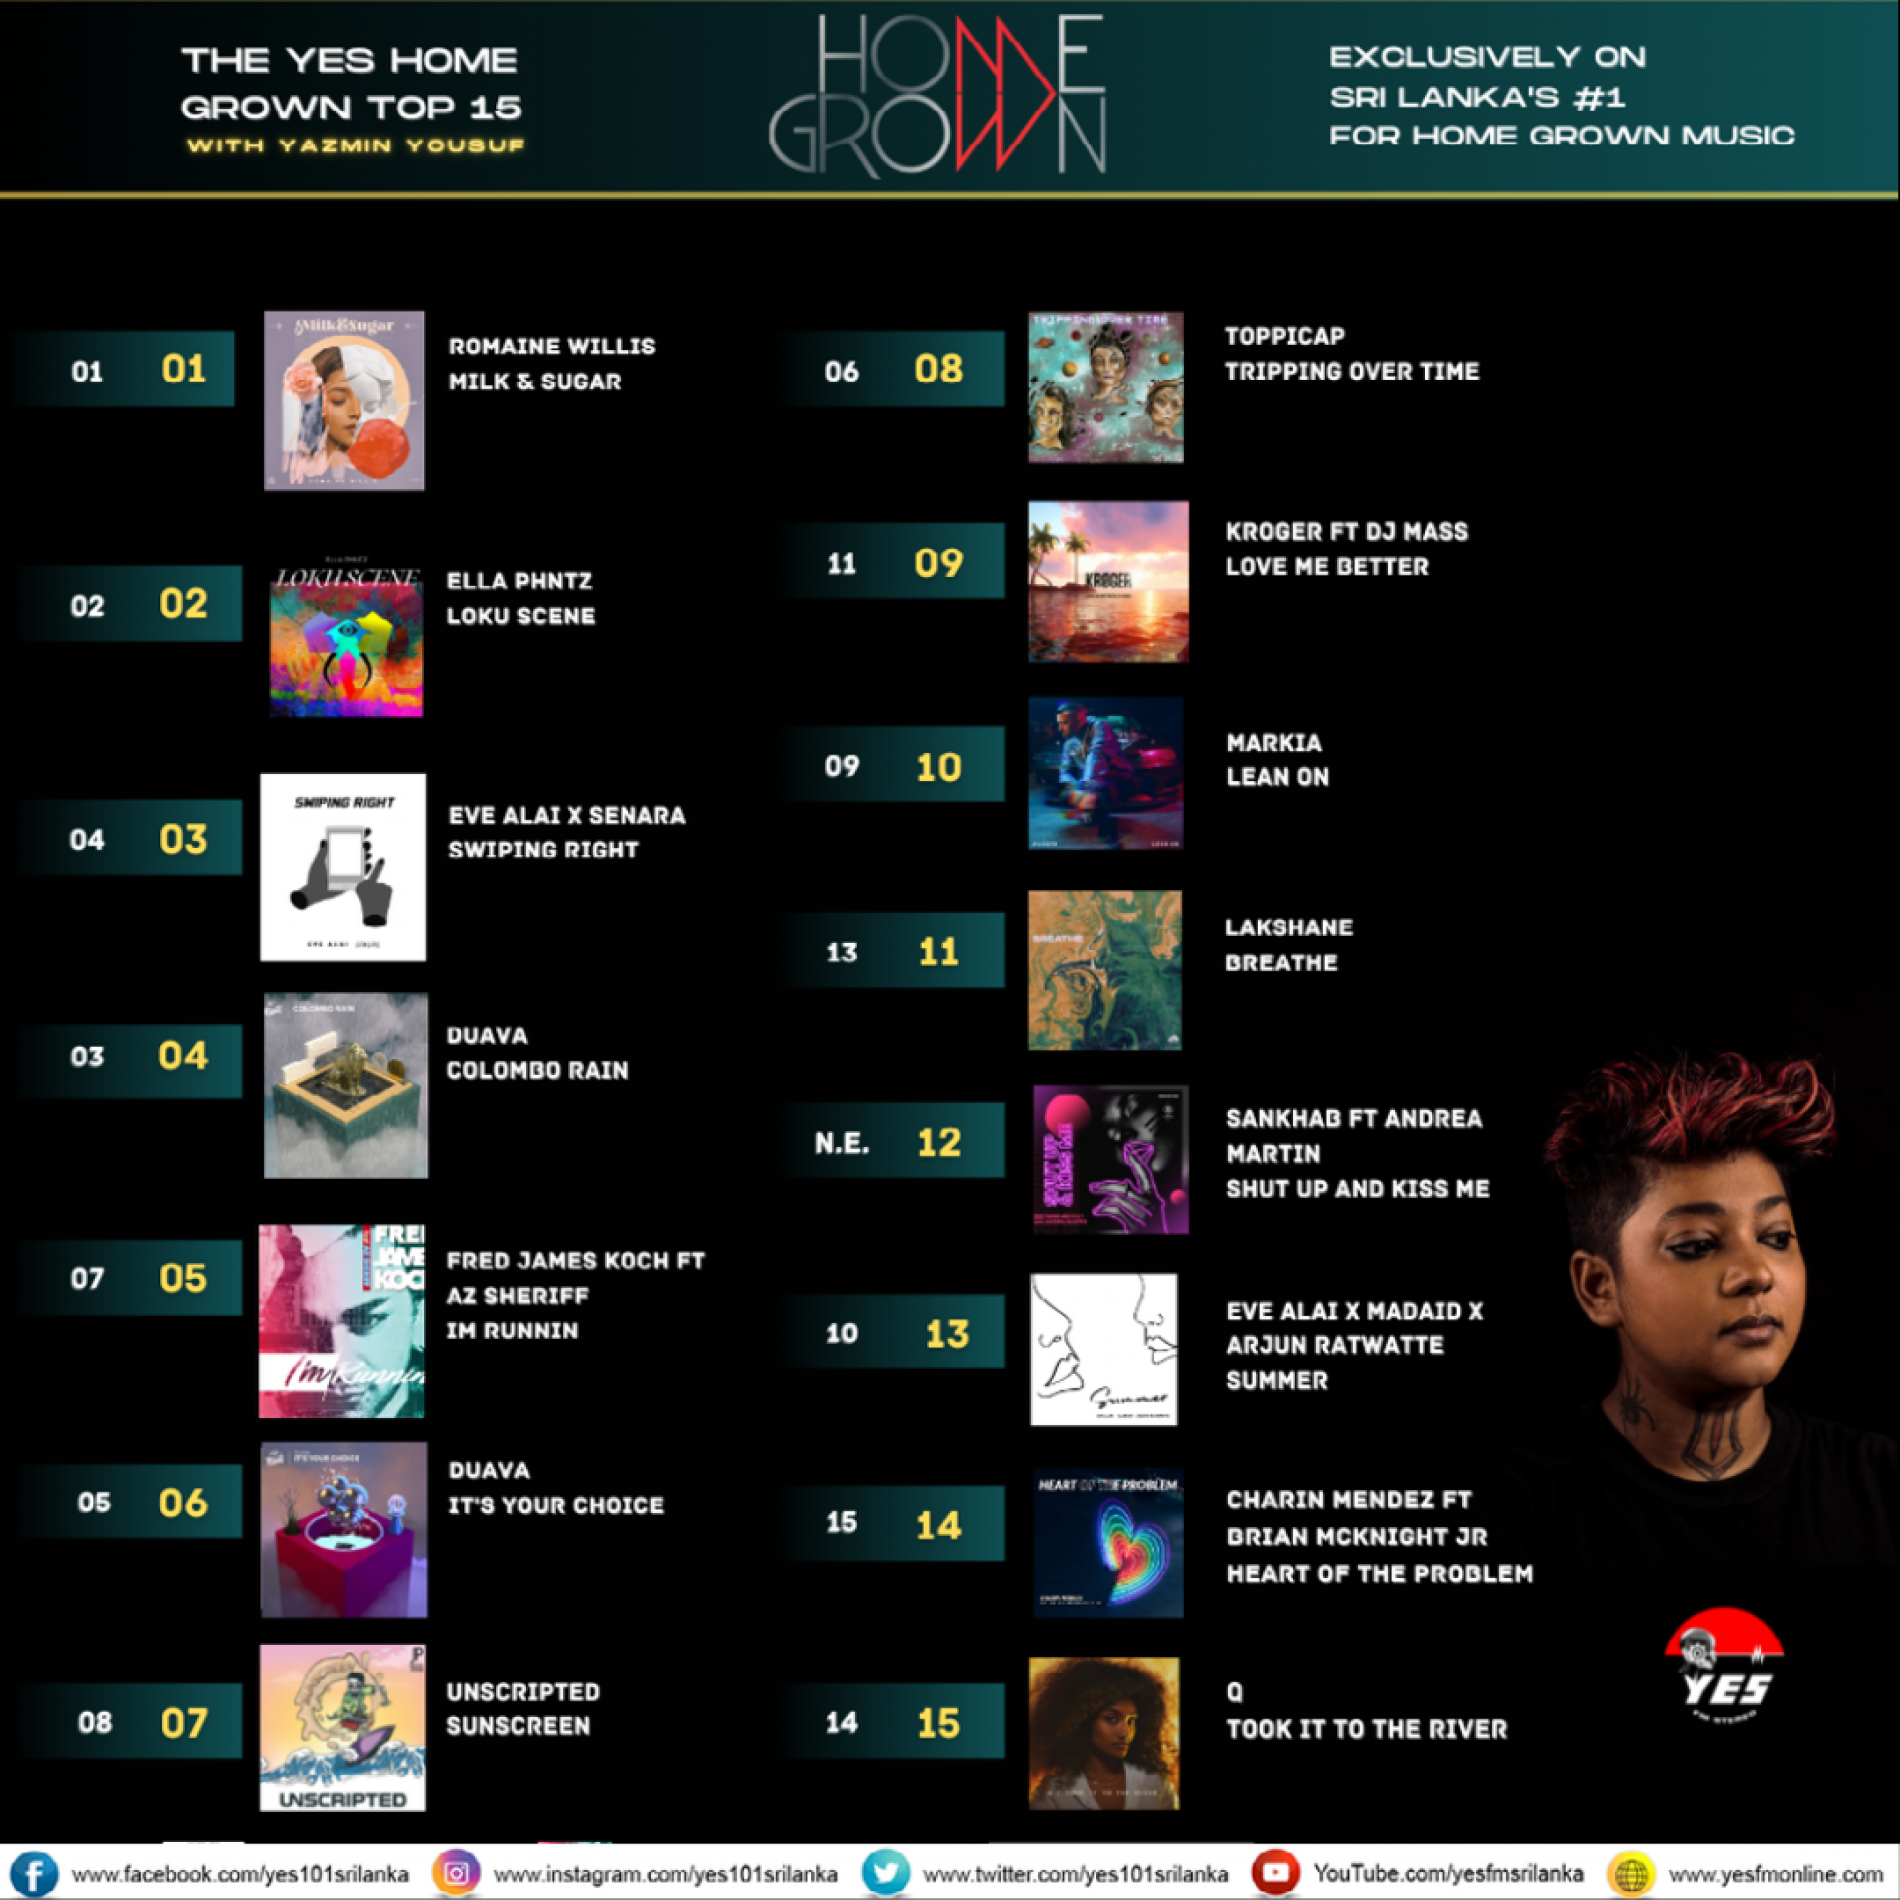 News : Romaine Willis Stays At Number 1 For A 3rd Week!